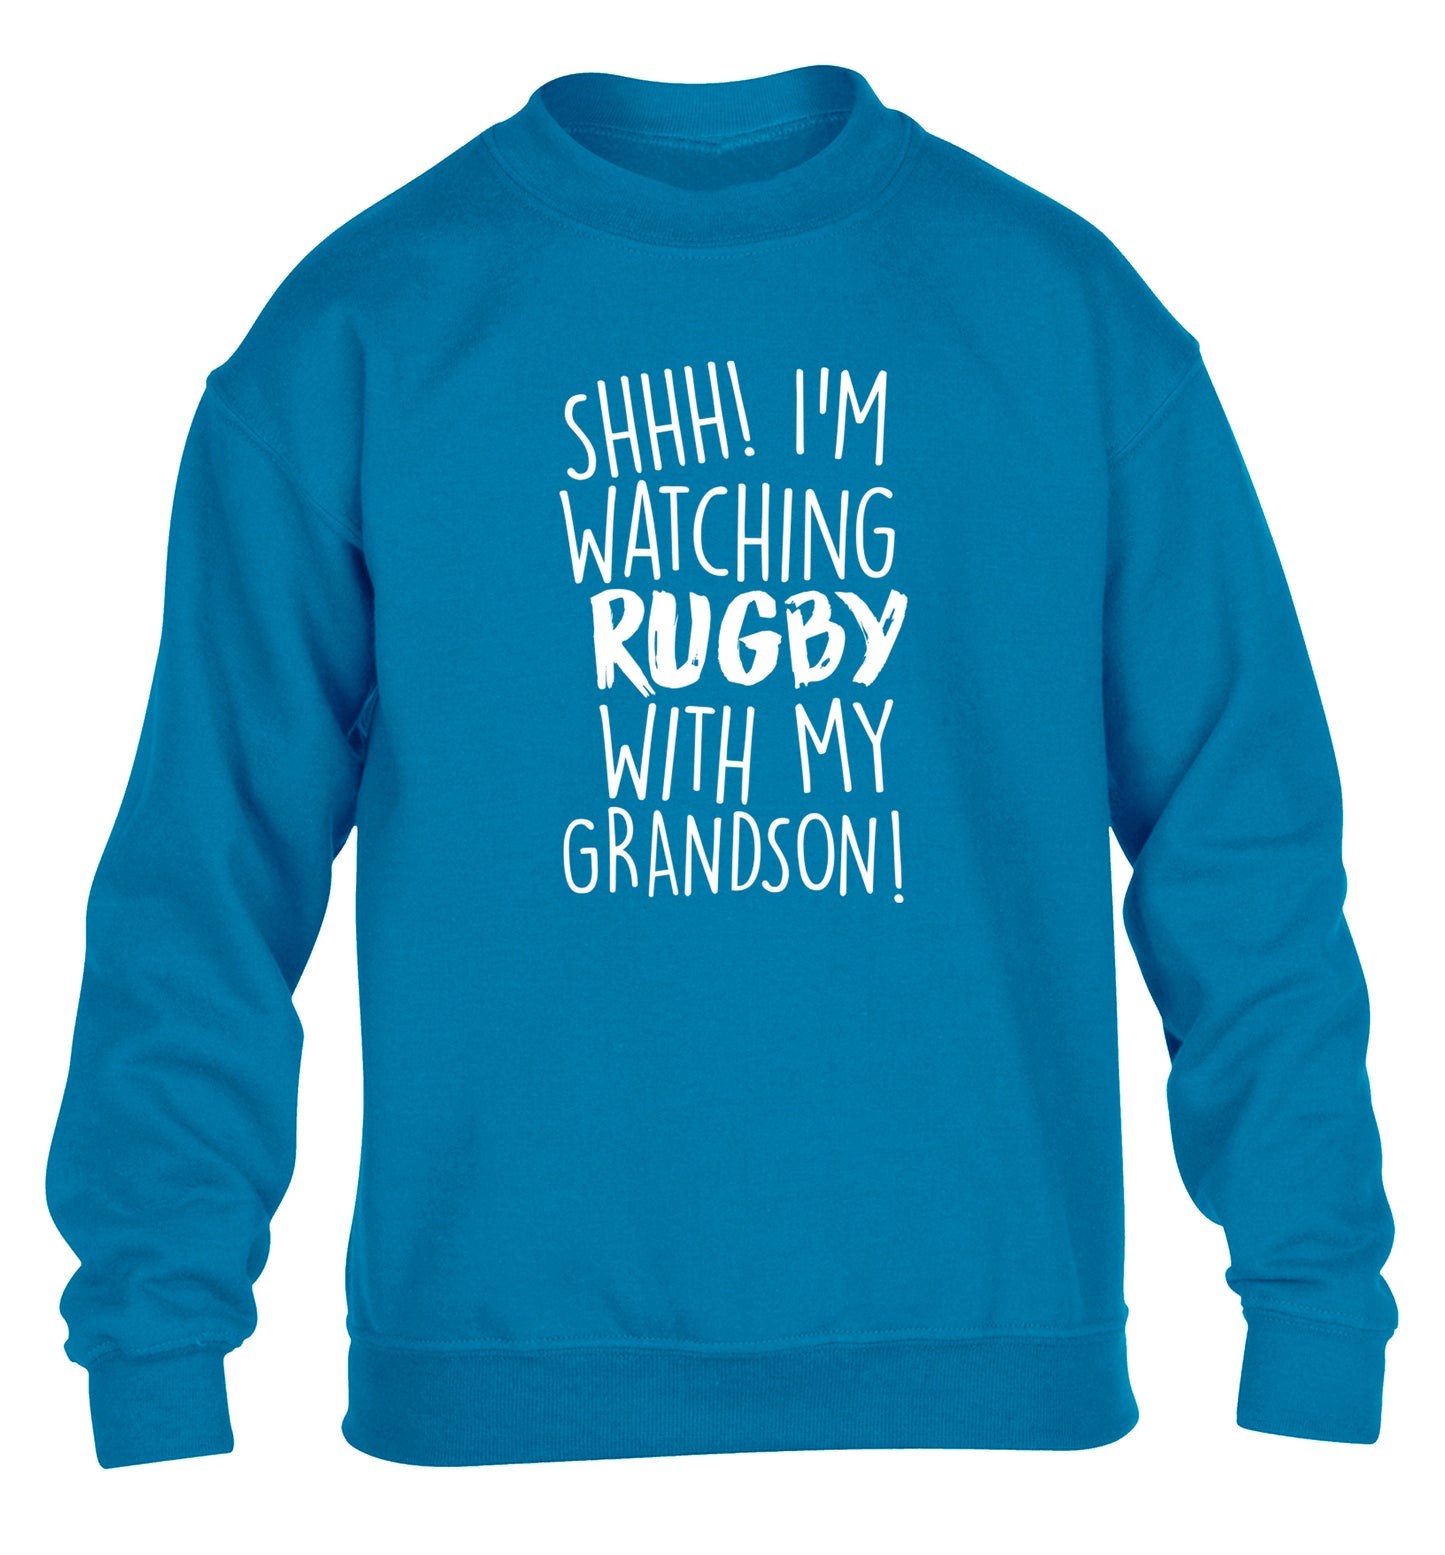 Shh I'm watching rugby with my grandson children's blue sweater 12-13 Years